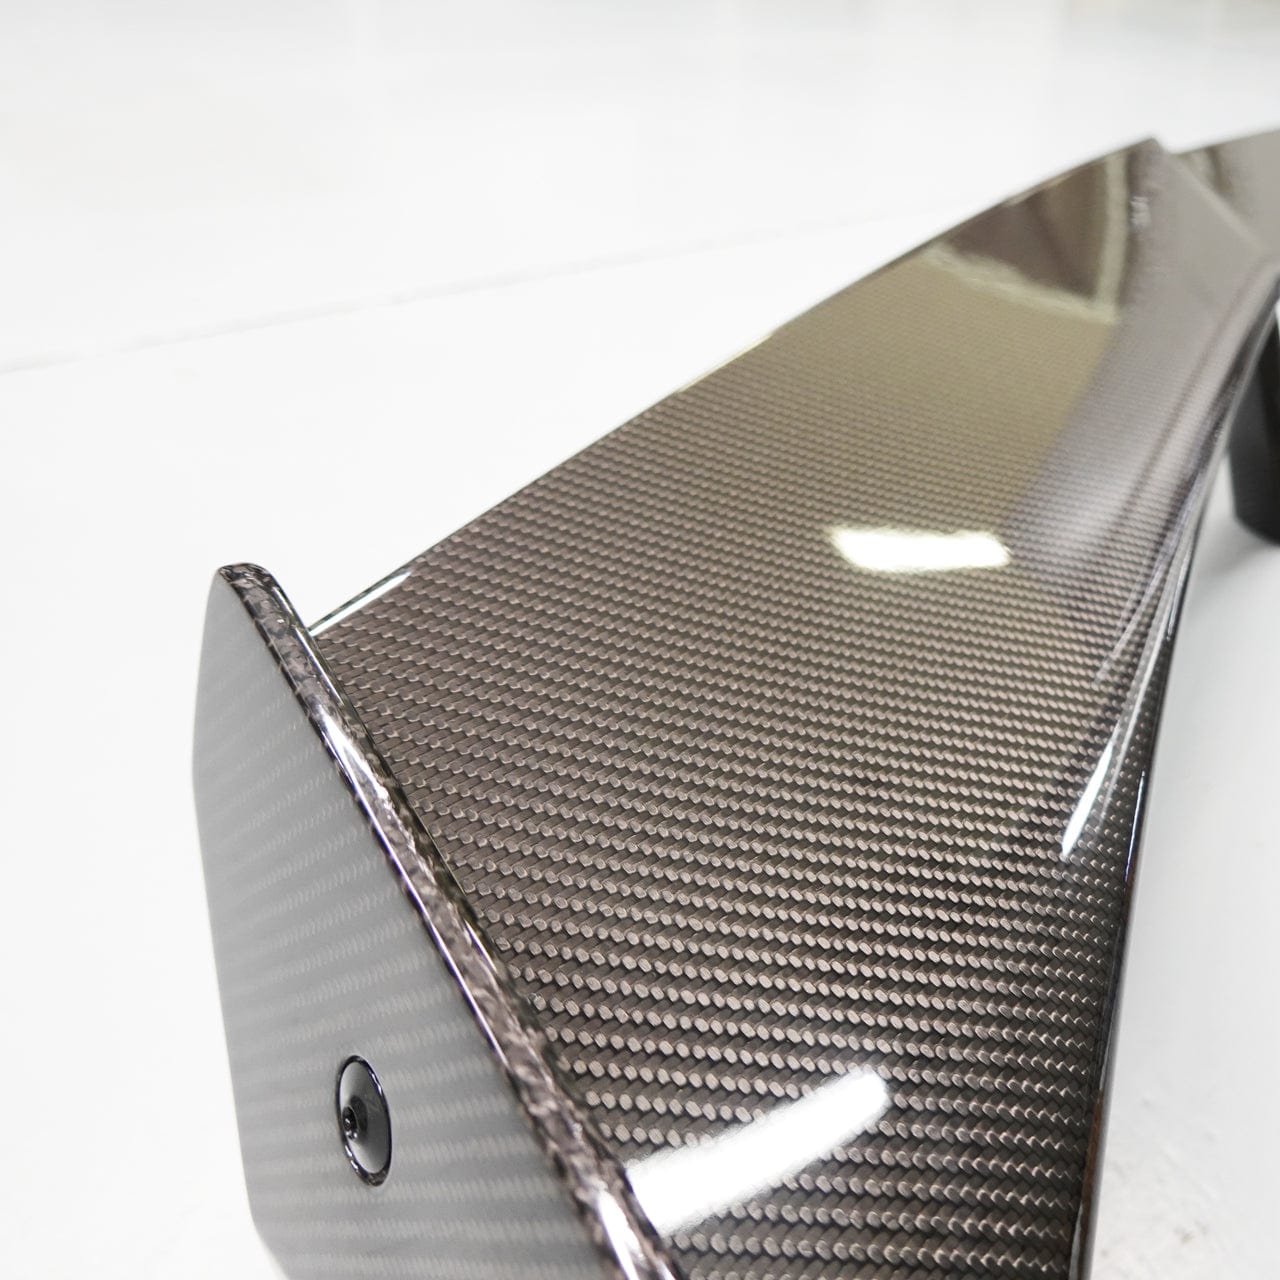 ACS Composite C8 Visible Carbon Fiber High Wing Spoiler (SKU nan) for improved aerodynamics and traction on your Corvette.